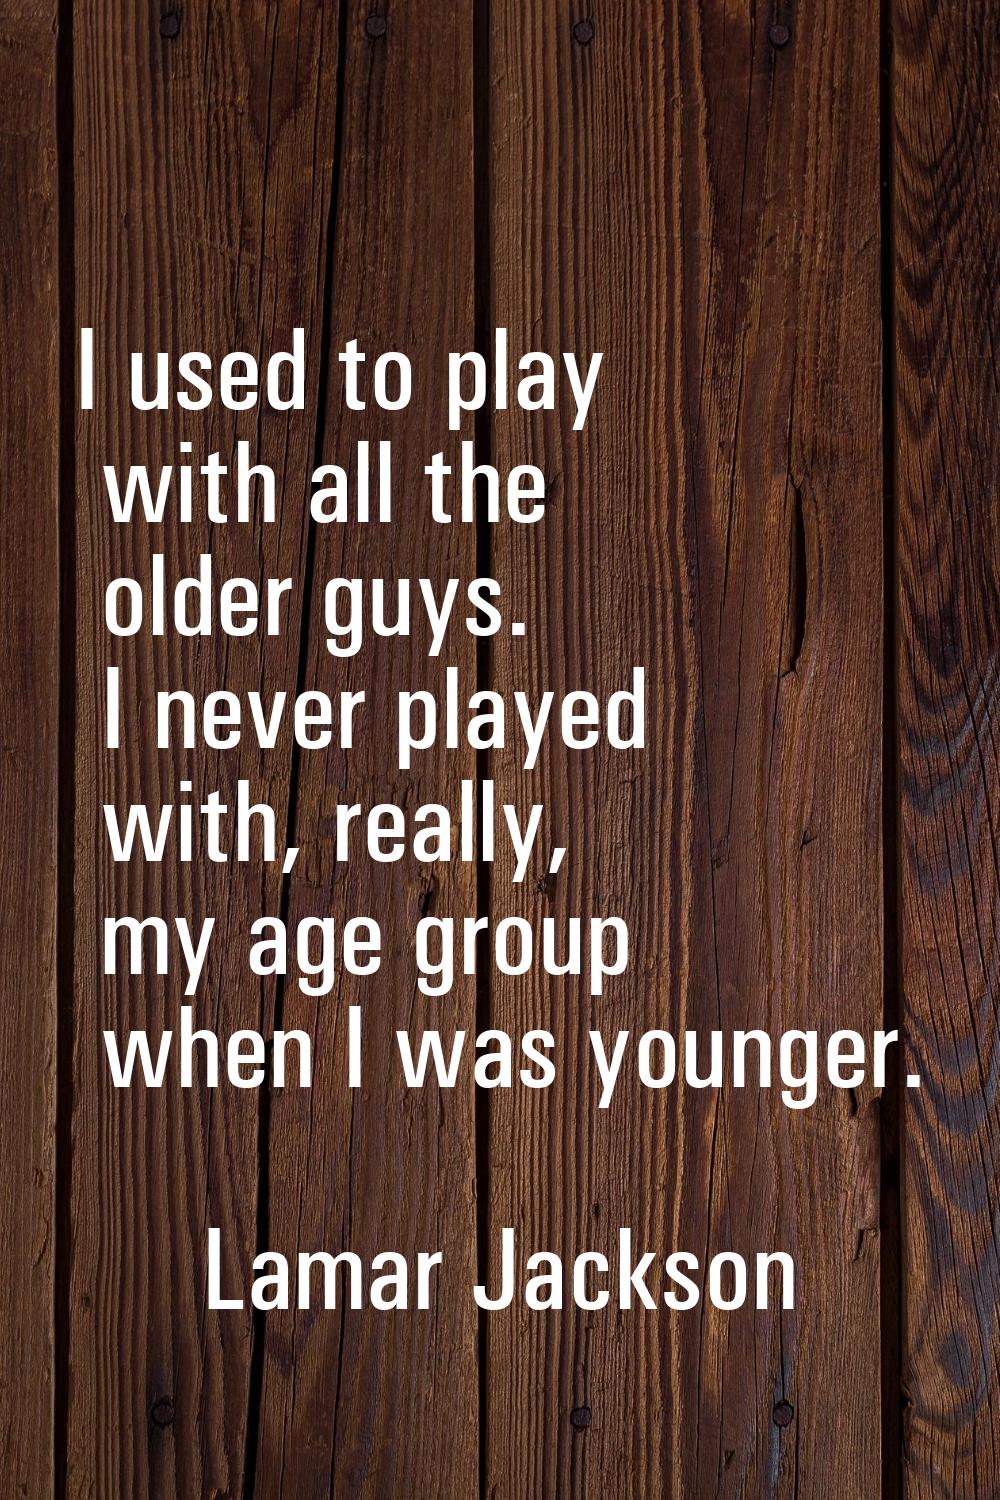 I used to play with all the older guys. I never played with, really, my age group when I was younge